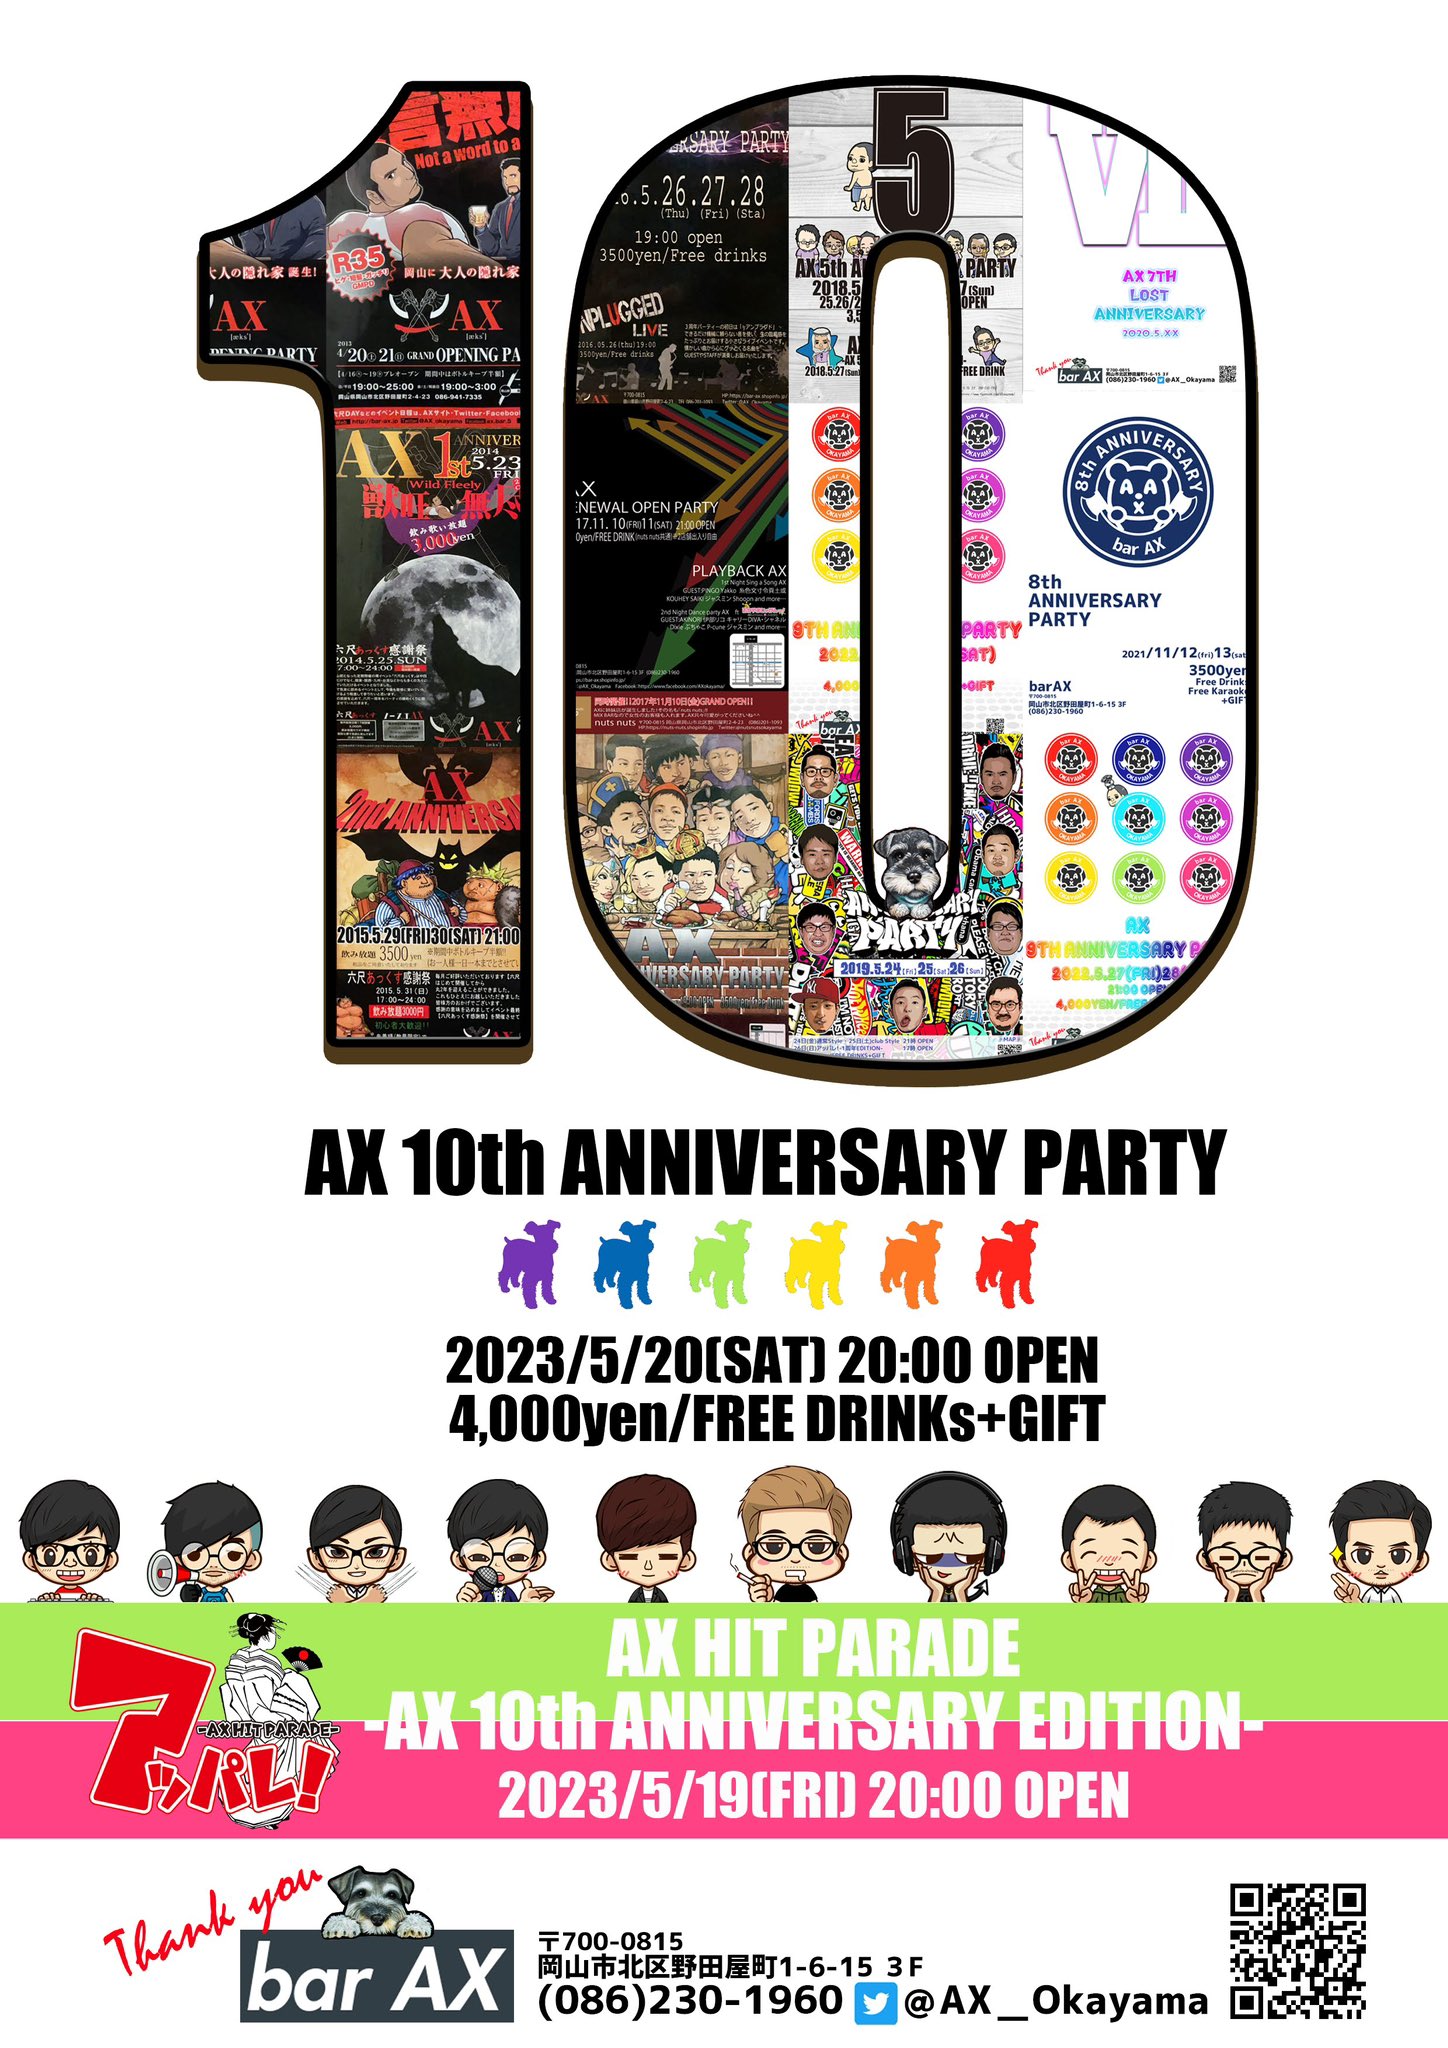 AX 10th Anniversary Party